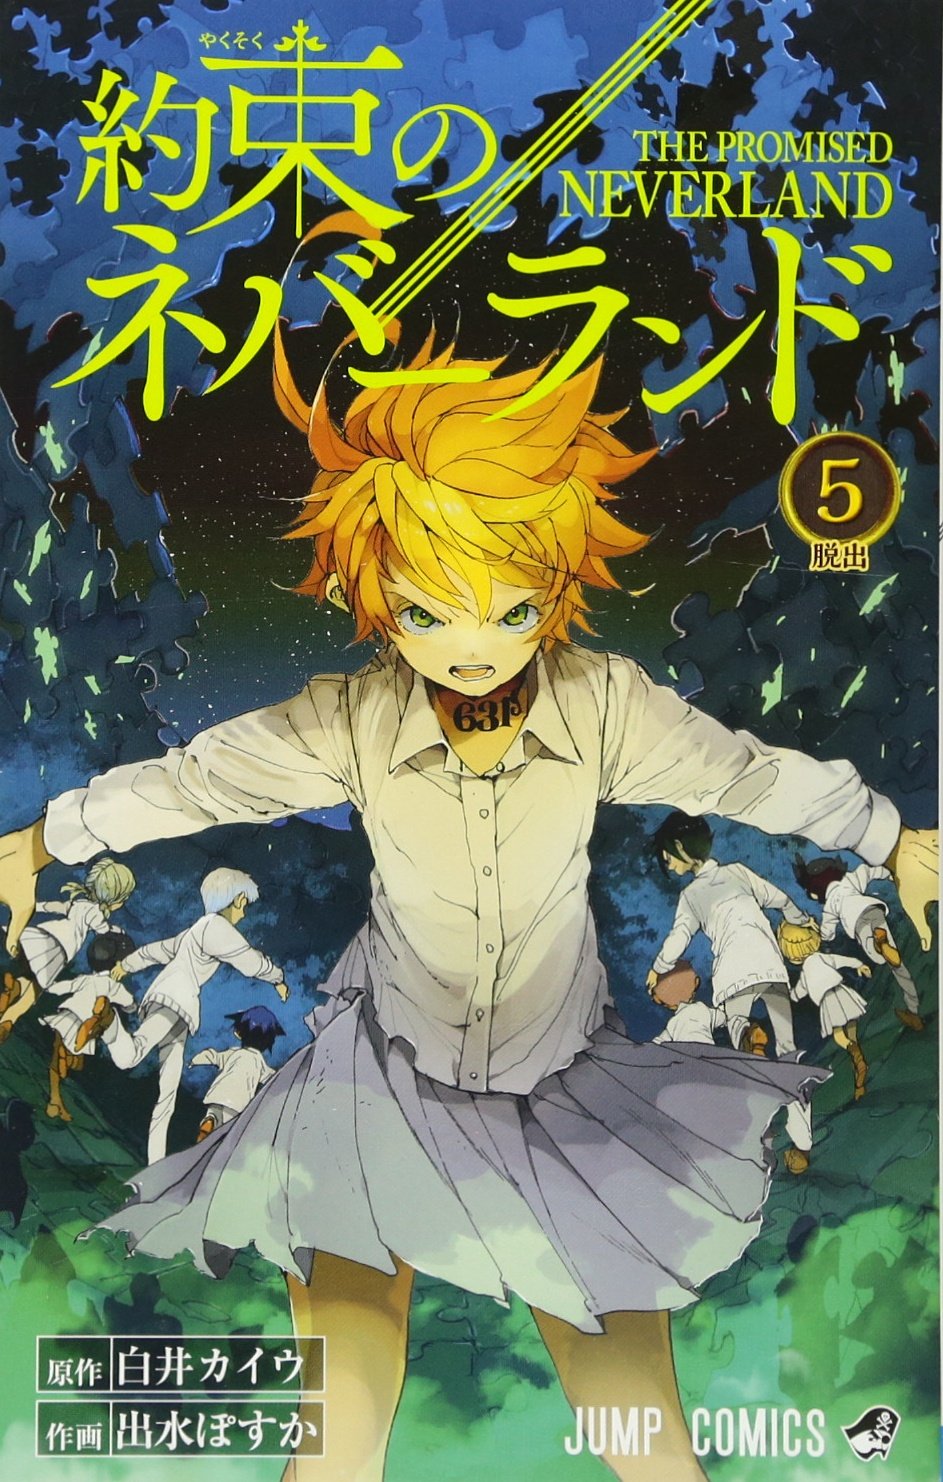 The Promised Neverland Japanese manga volume 5 front cover